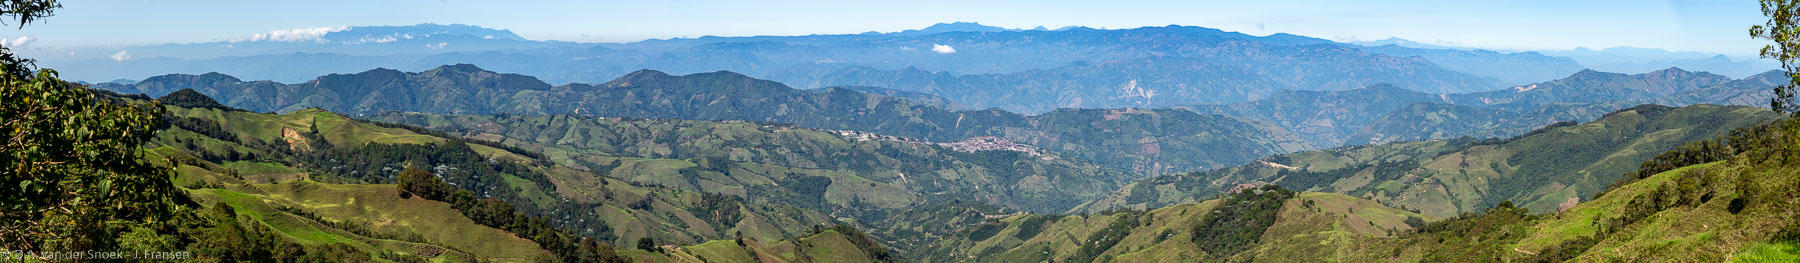 Colombia-1149-Pano.jpg